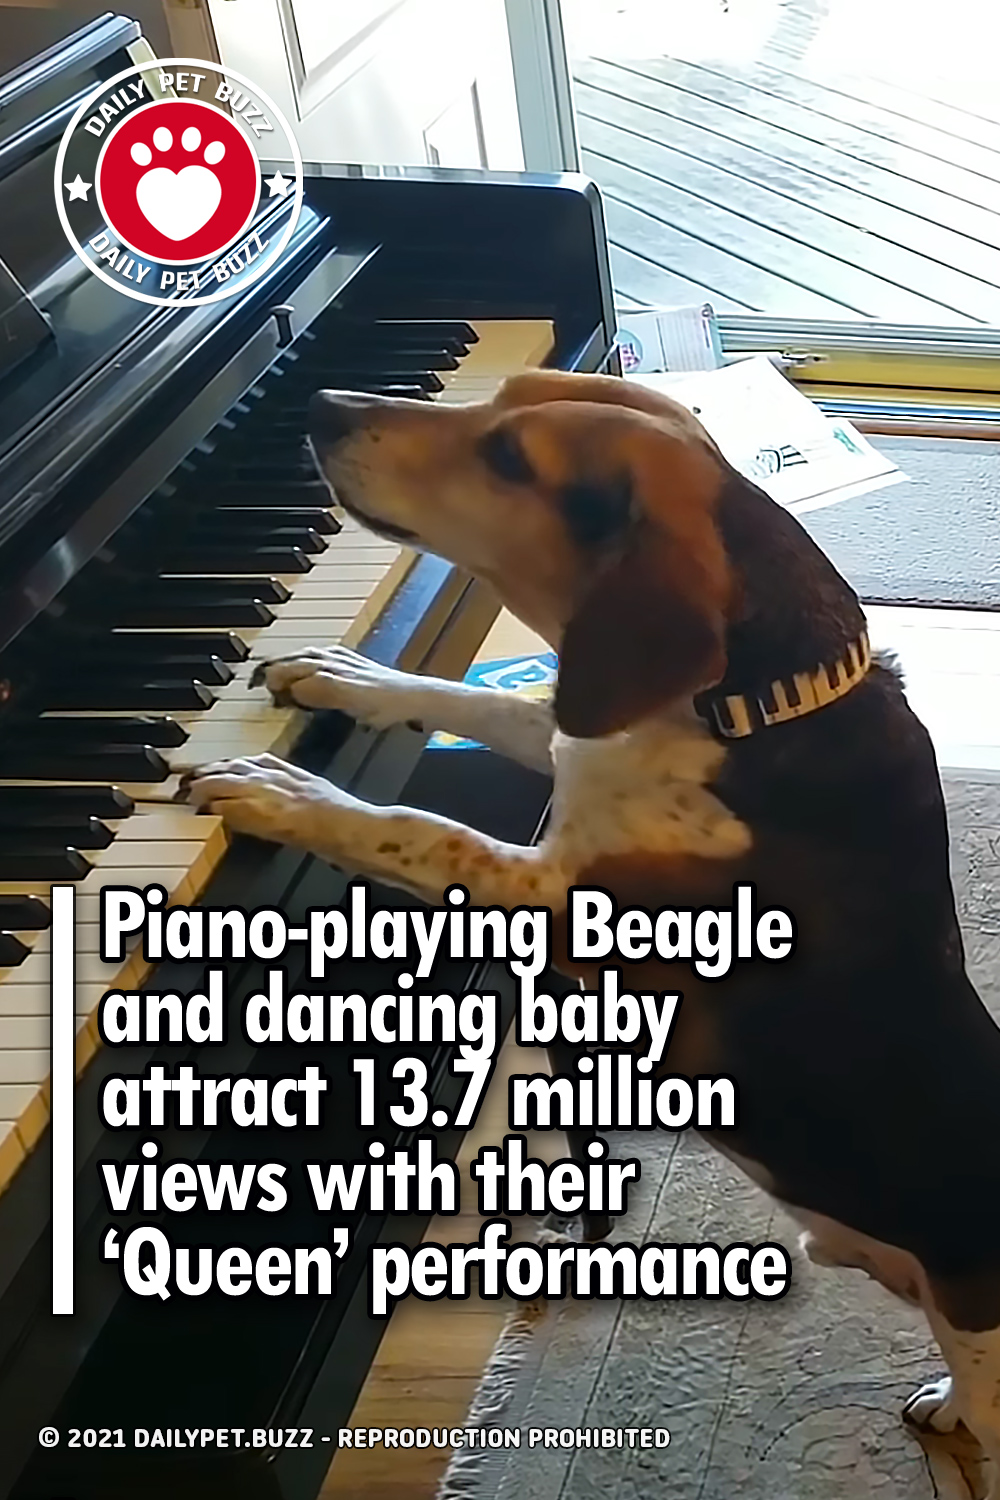 Piano-playing Beagle and dancing baby attract 13.7 million views with their ‘Queen’ performance